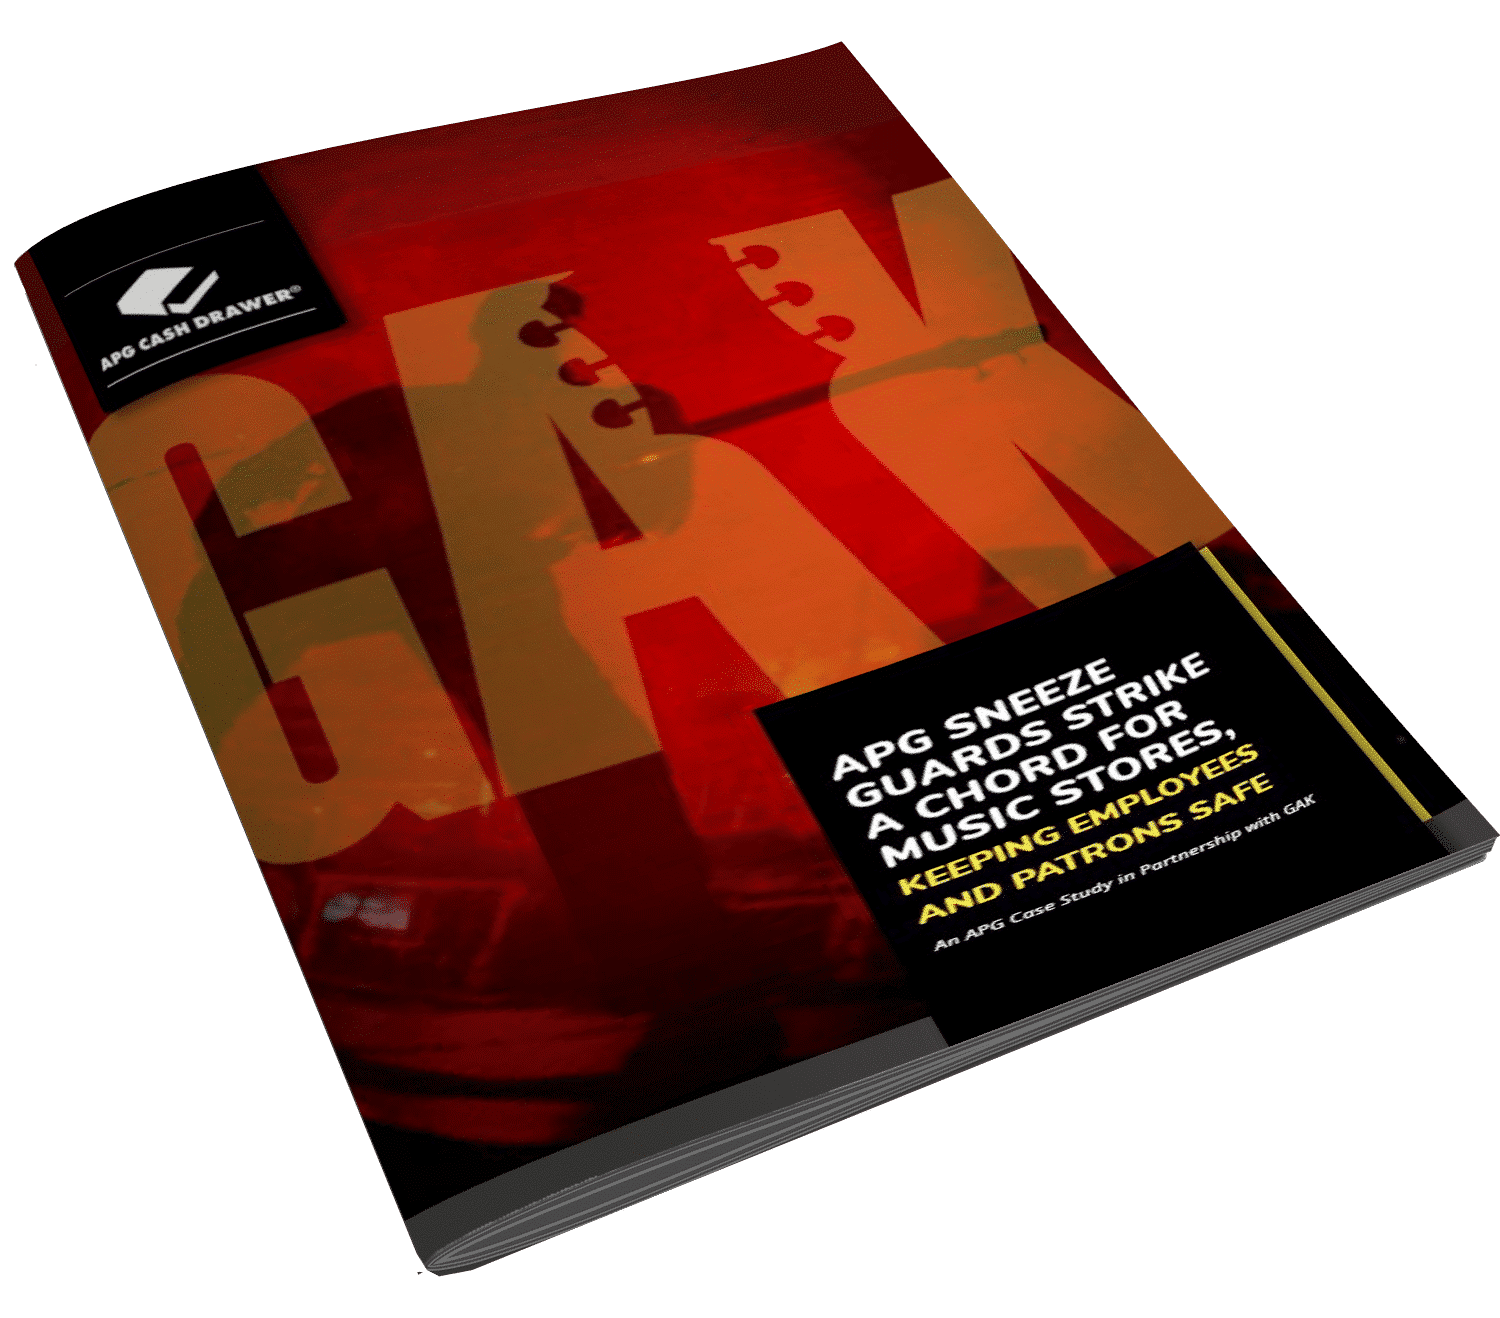 APG Sneeze Guard Case Study in Partnership With GAK